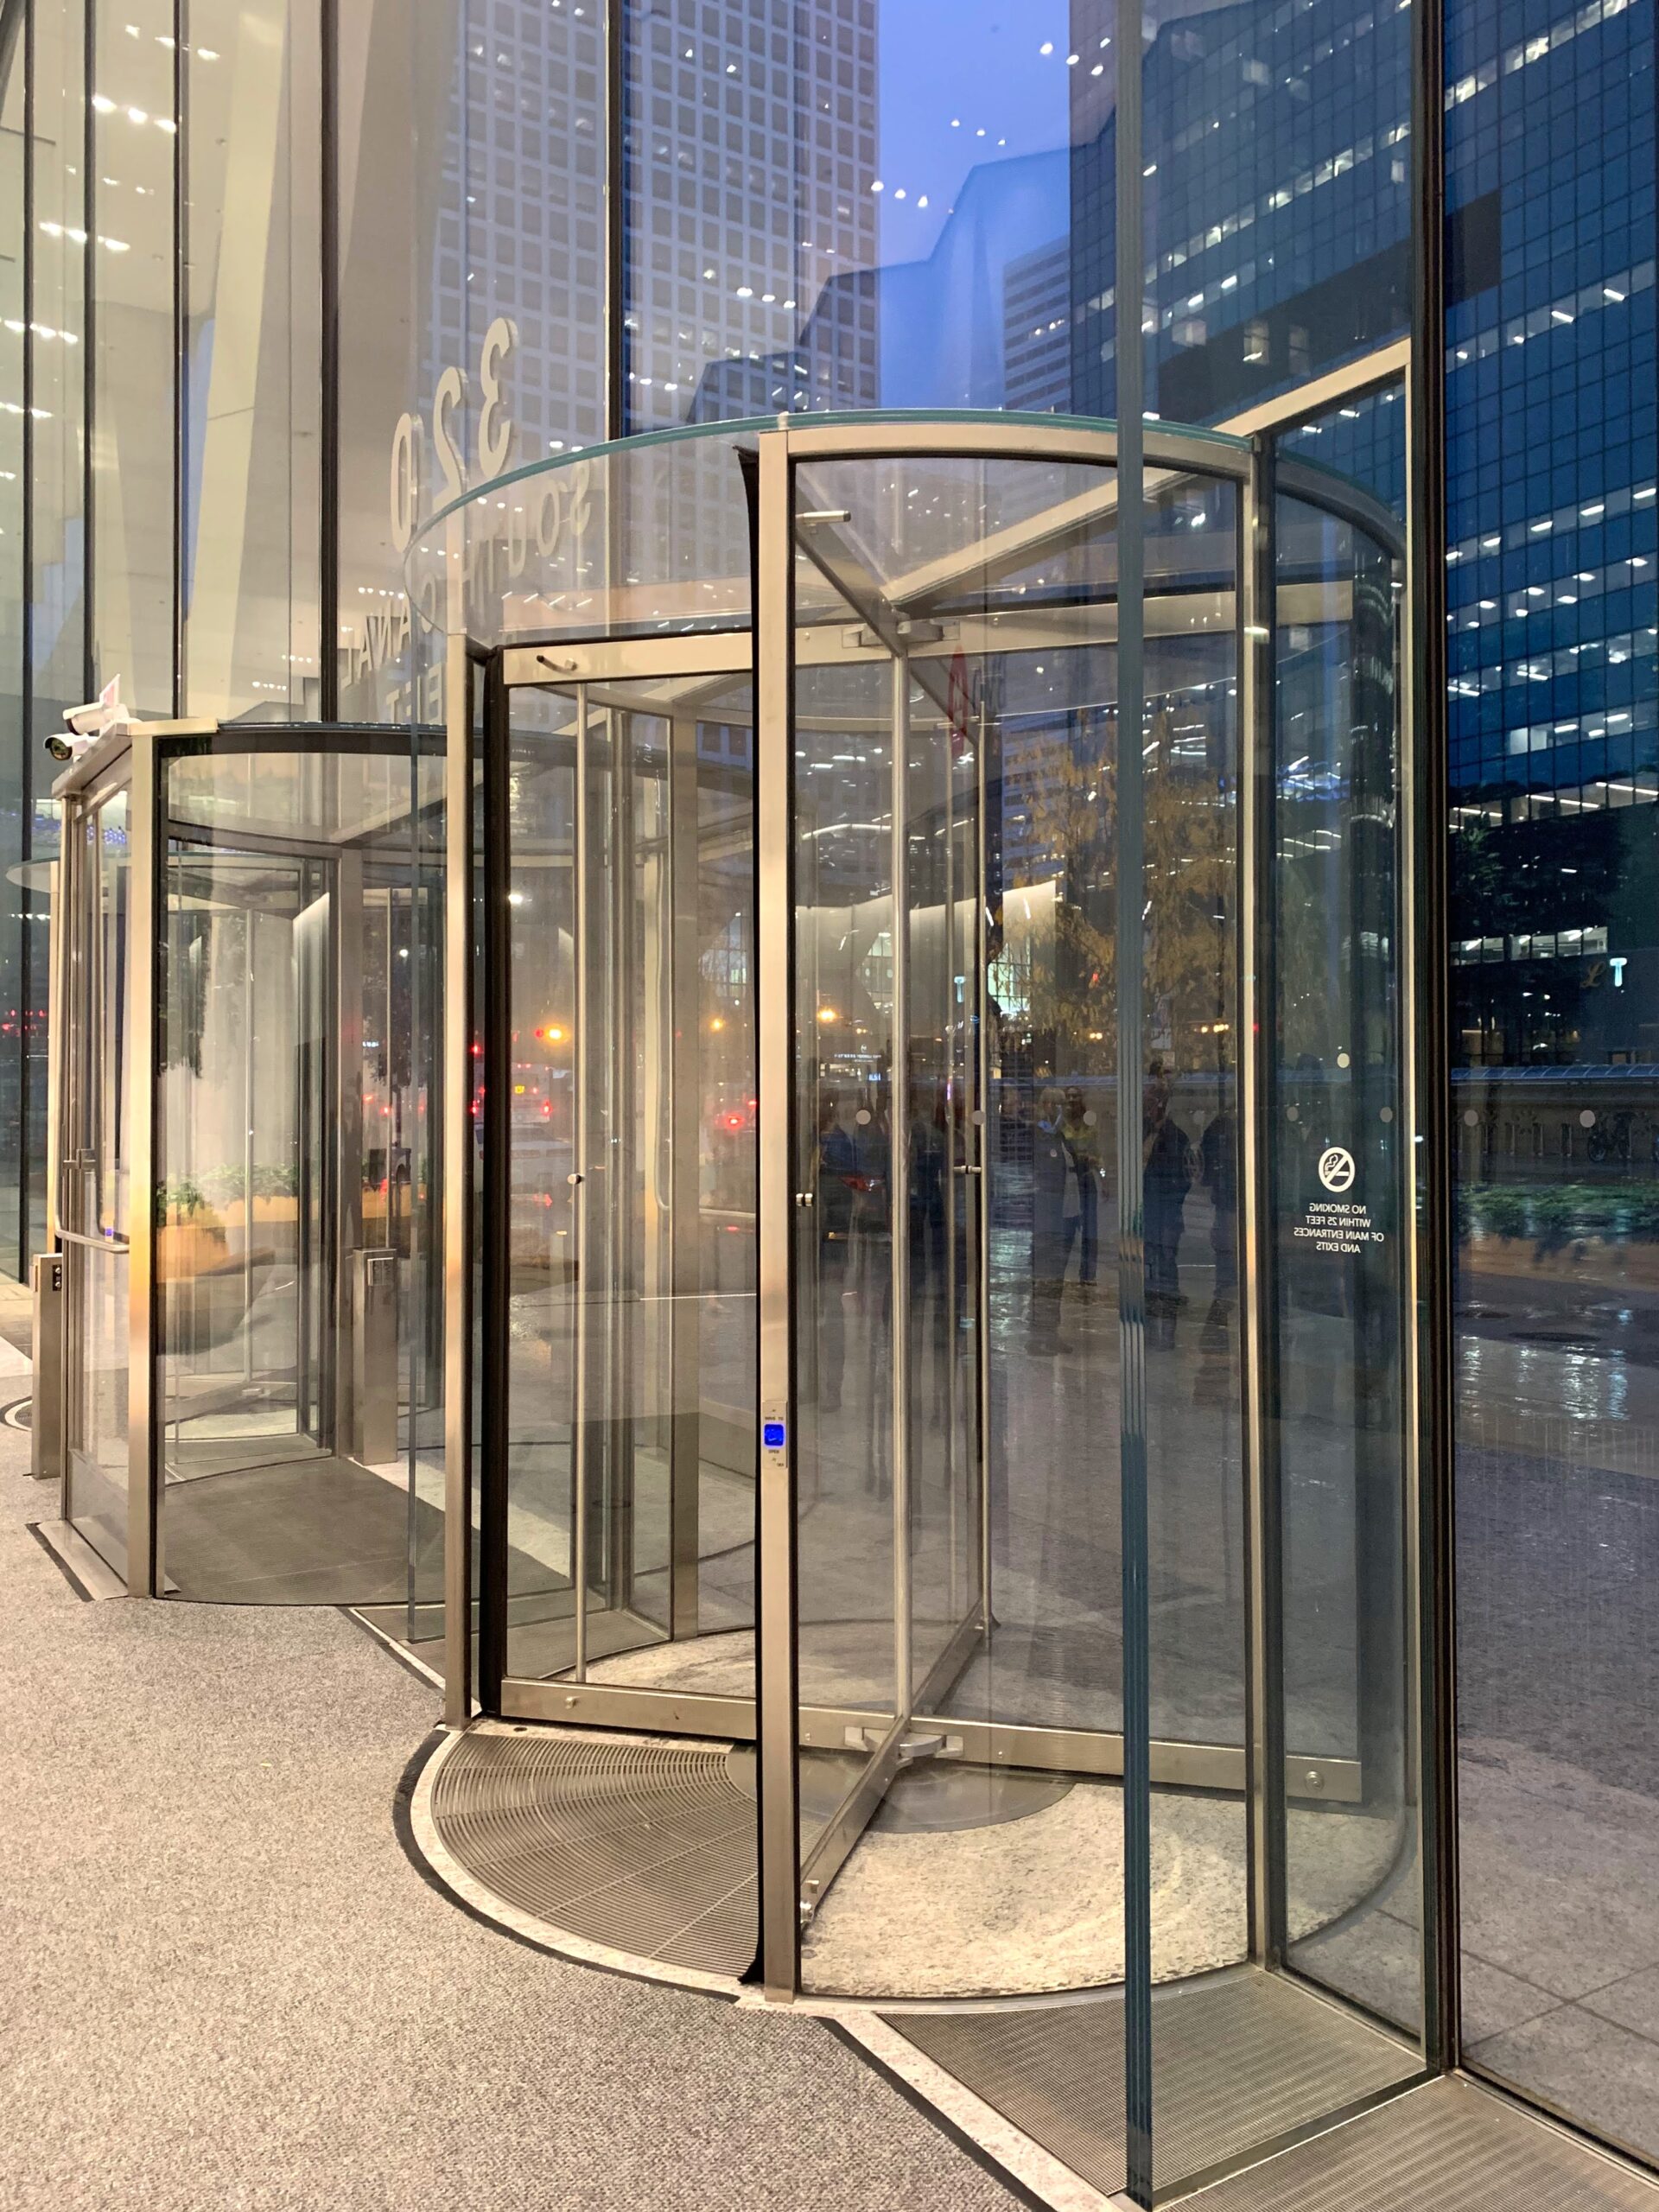 A photo of an architectural building product. An interior entrance to a large building, showing glass revolving doors.